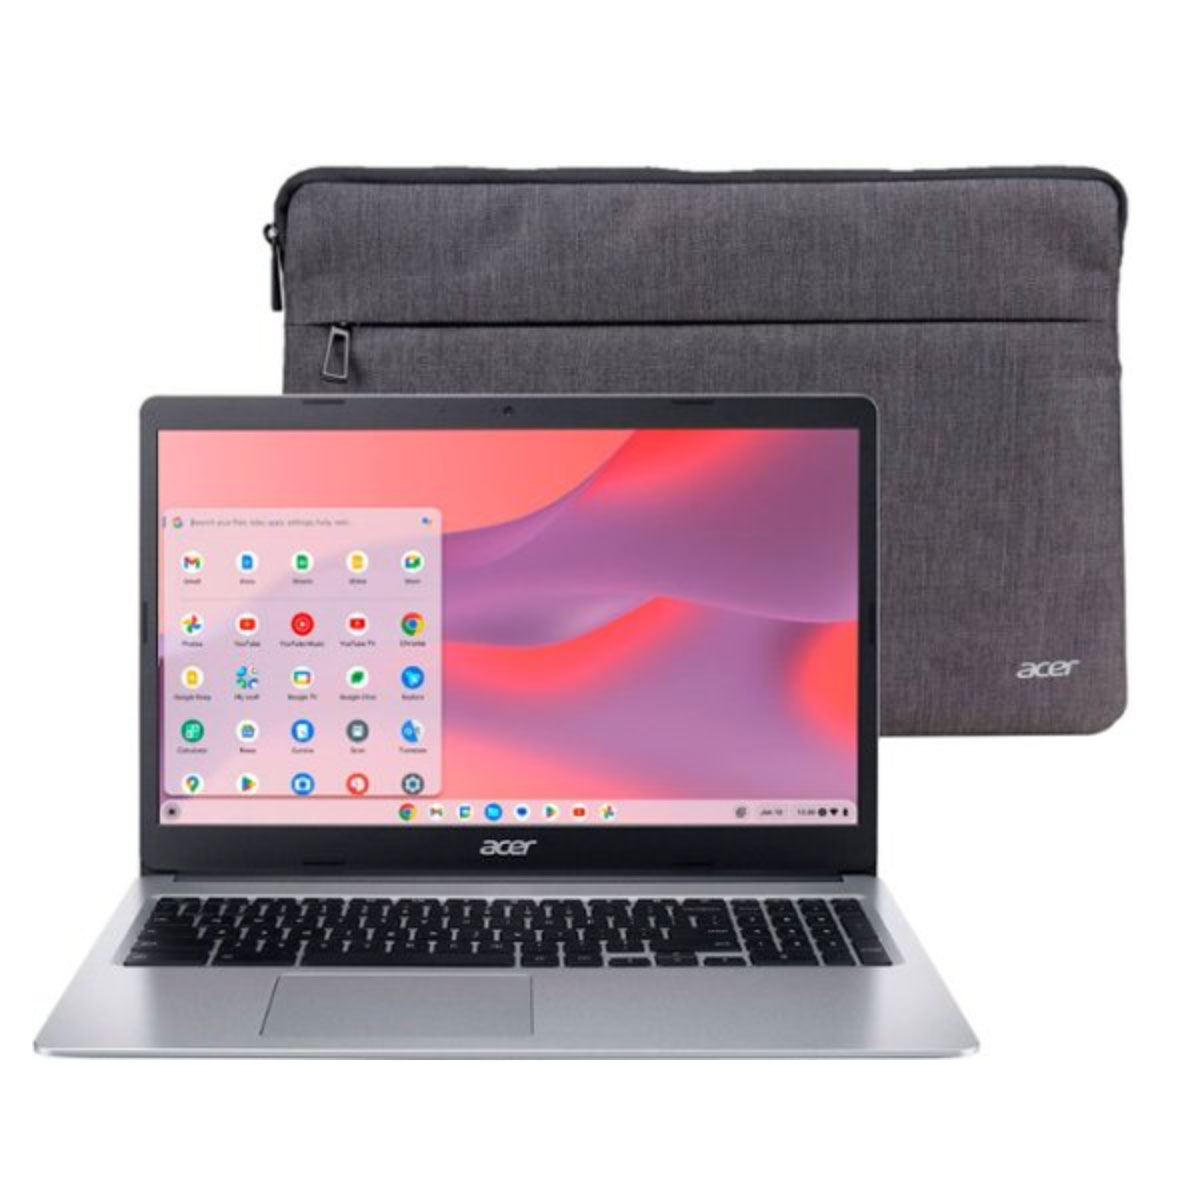 Acer laptop with laptop case